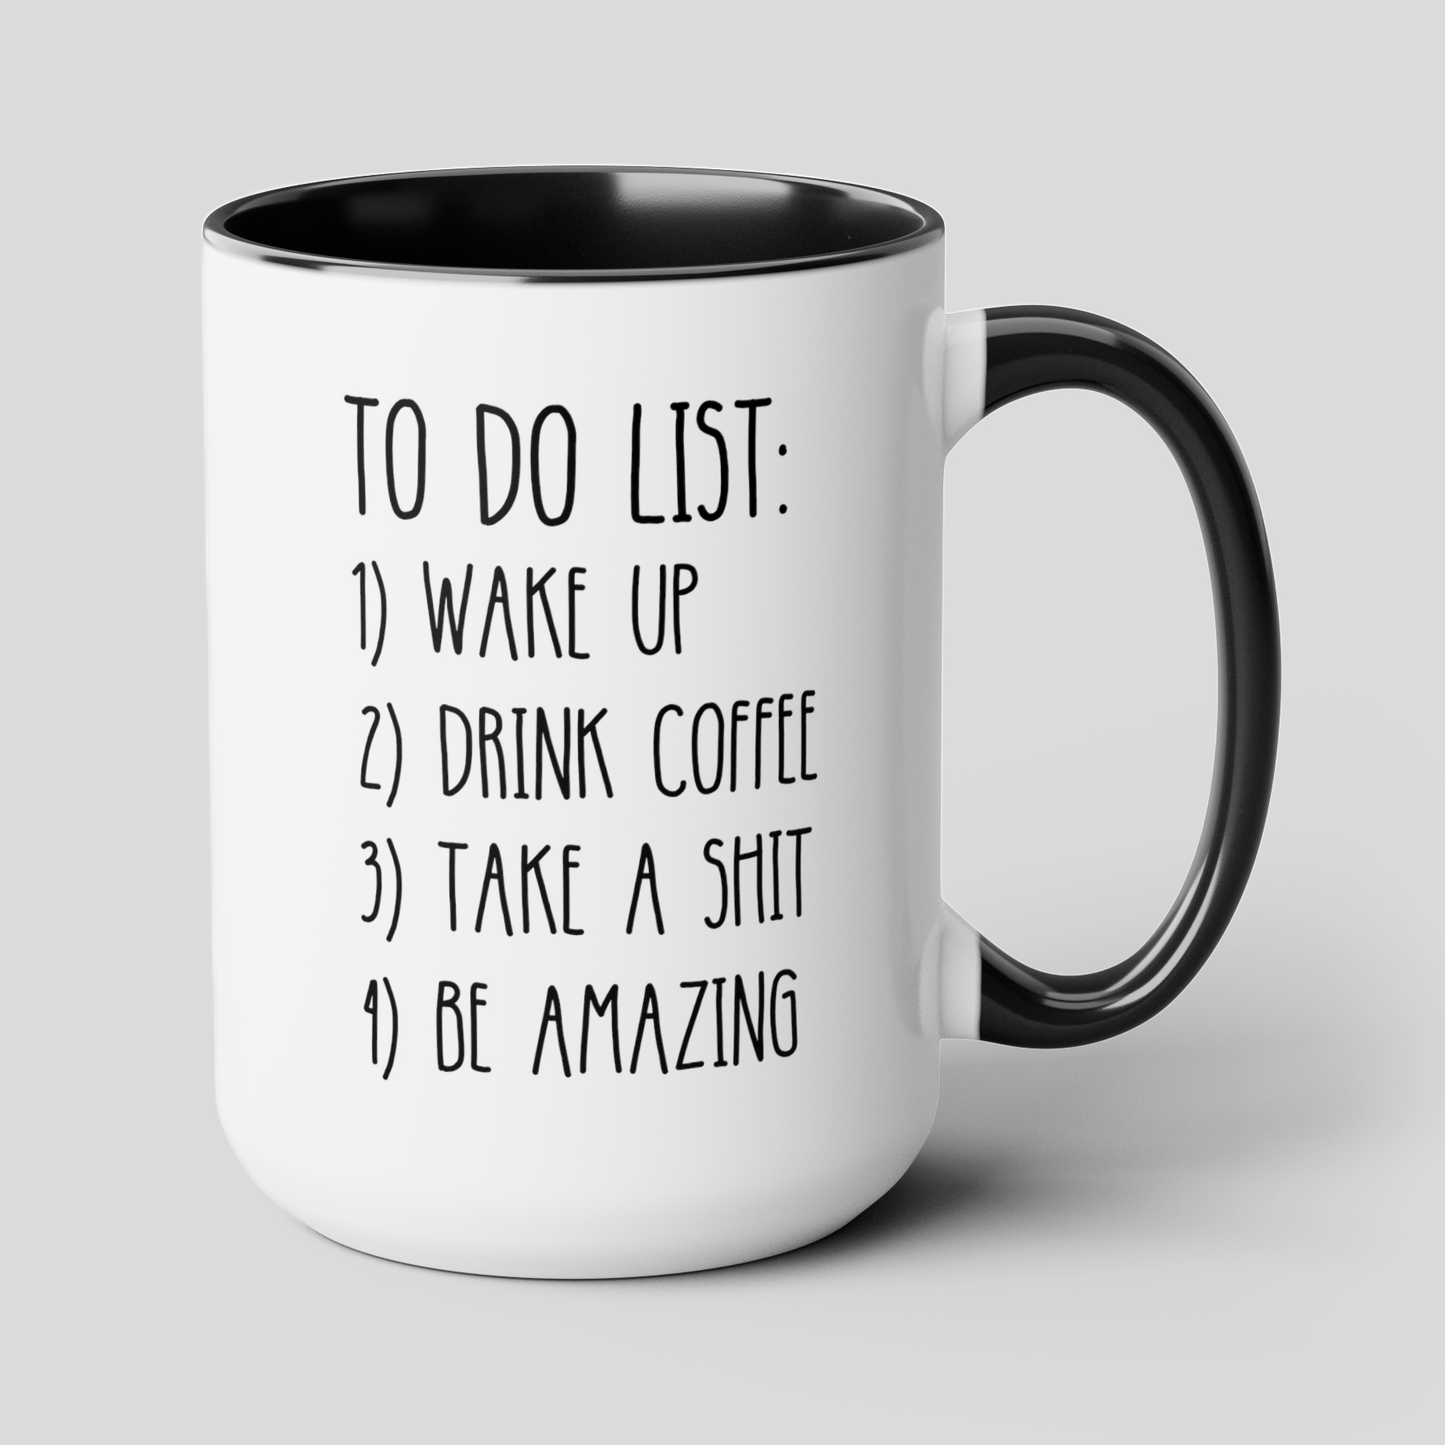 To Do List 15oz white with black accent funny large coffee mug gift inspirational motivational unique poop fun be amazing waveywares wavey wares wavywares wavy wares cover